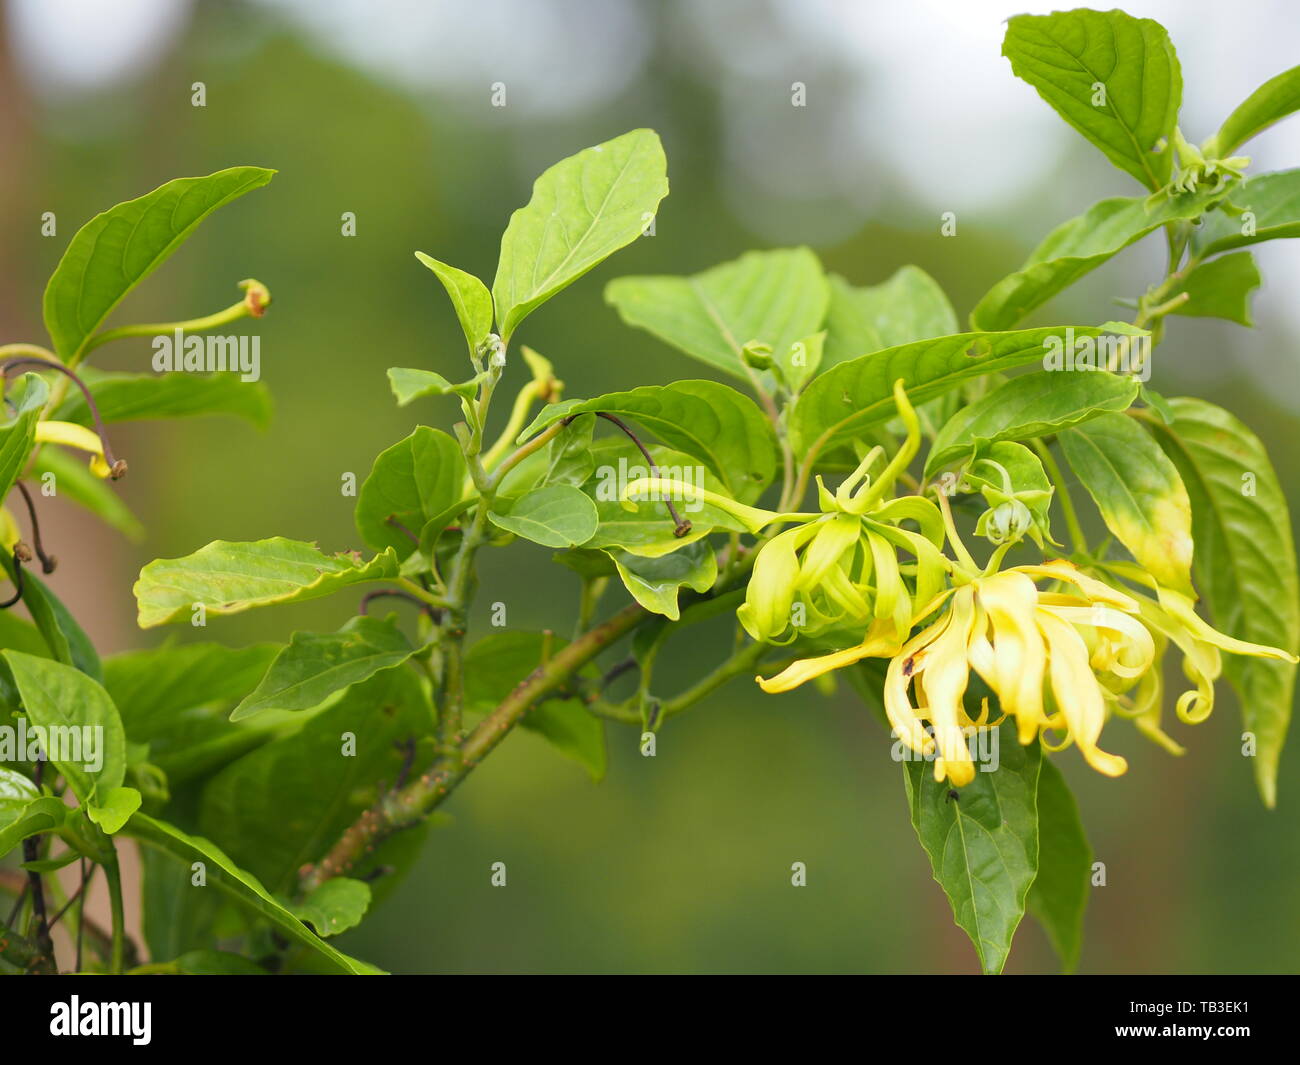 Cananga odorata Ylang-ylang name of flower Waves Gray bark Bouquet of flowers into a cluster Yellow or green petals are fragrant Stock Photo